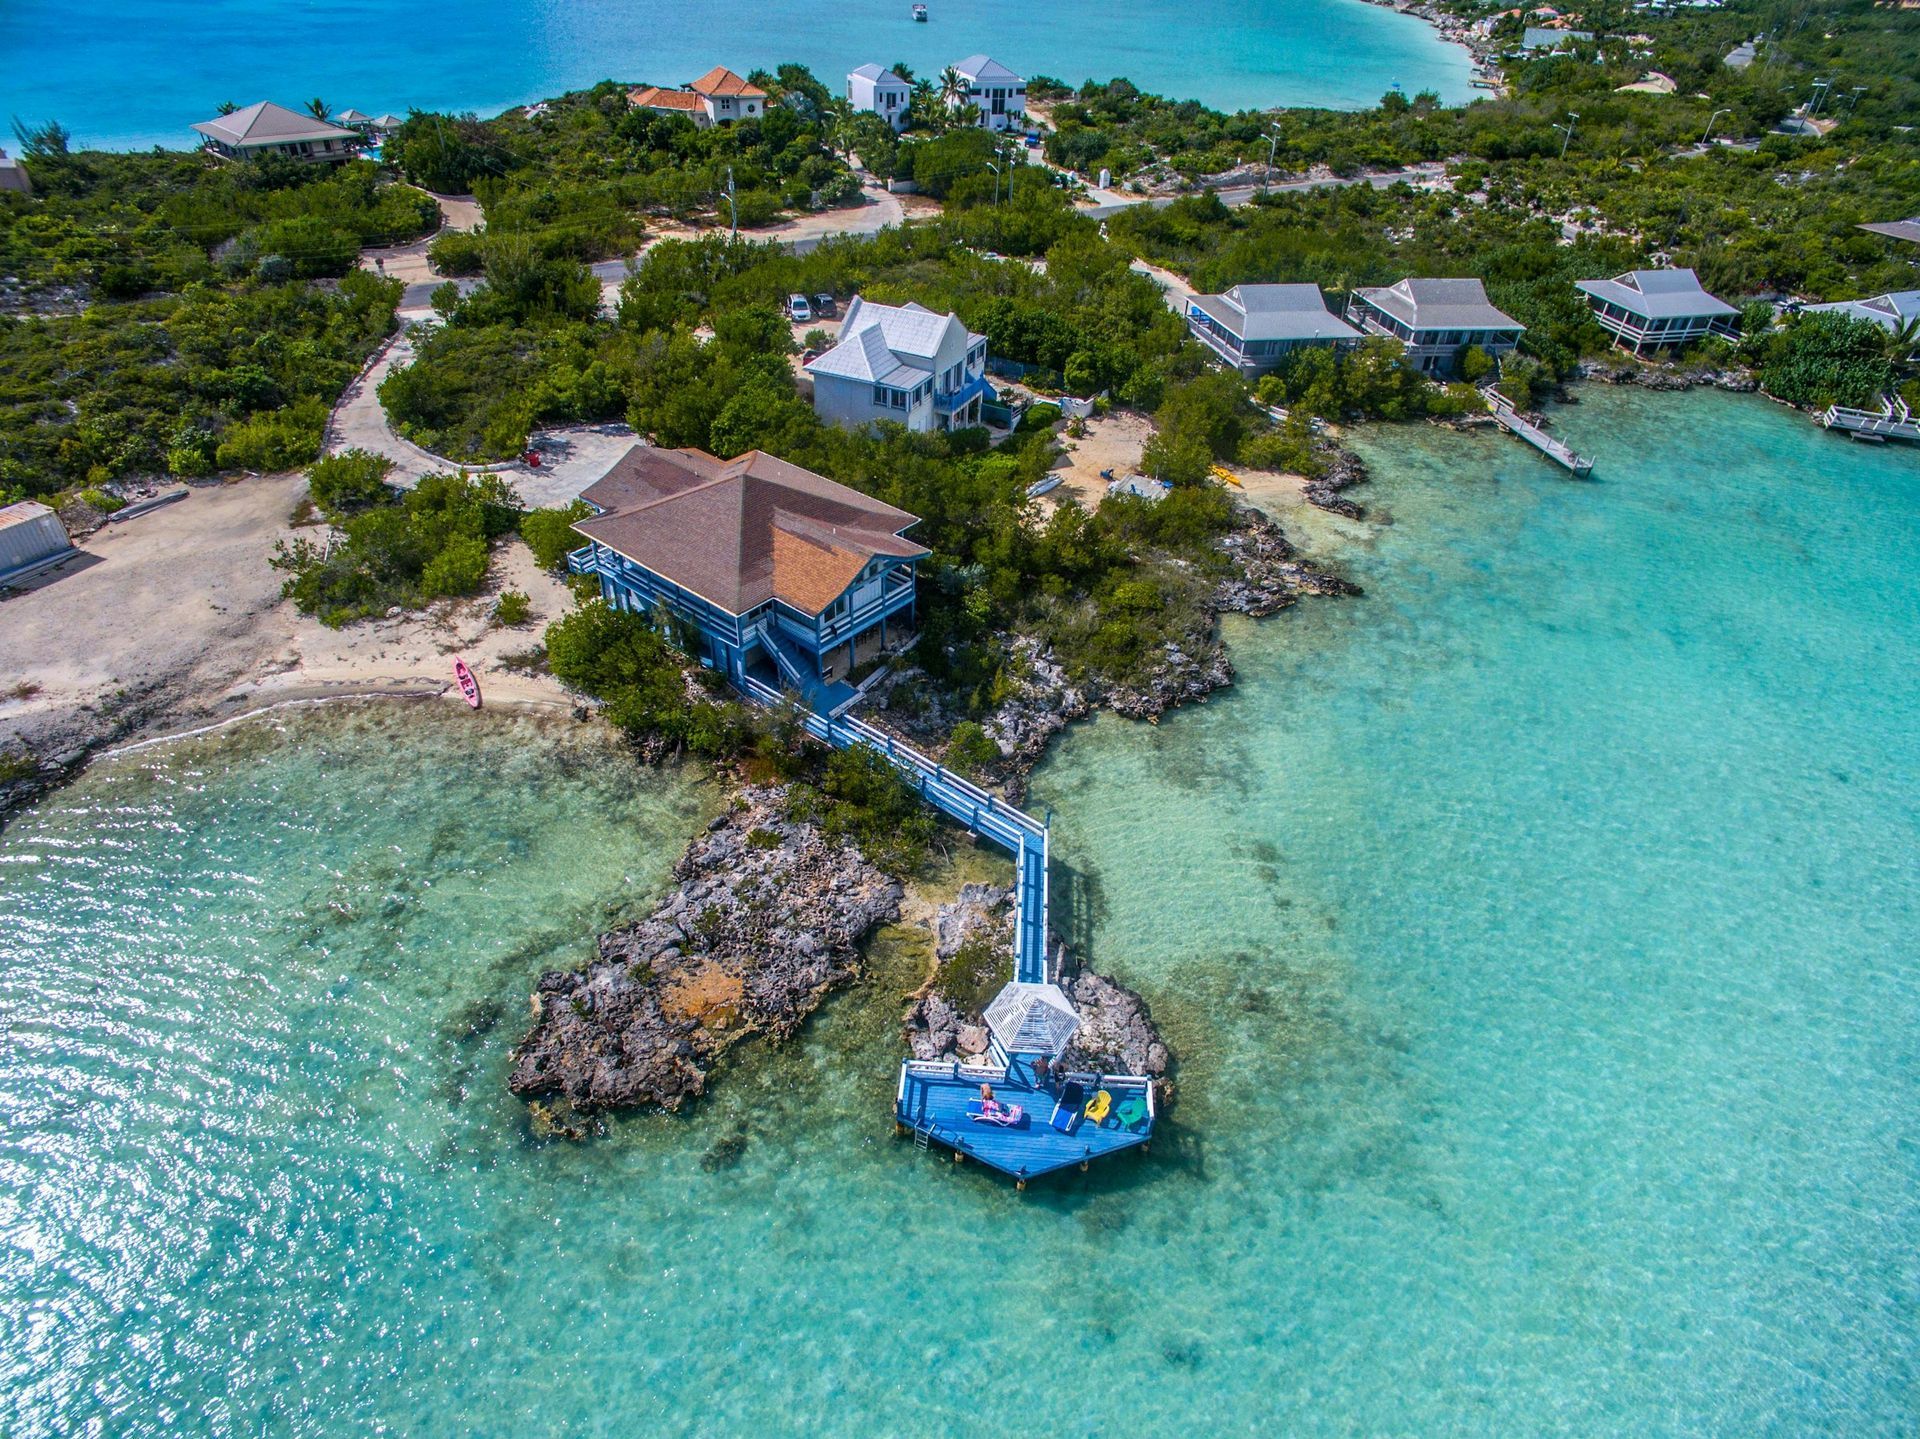 An aerial view of a house on a small island in the middle of the ocean.